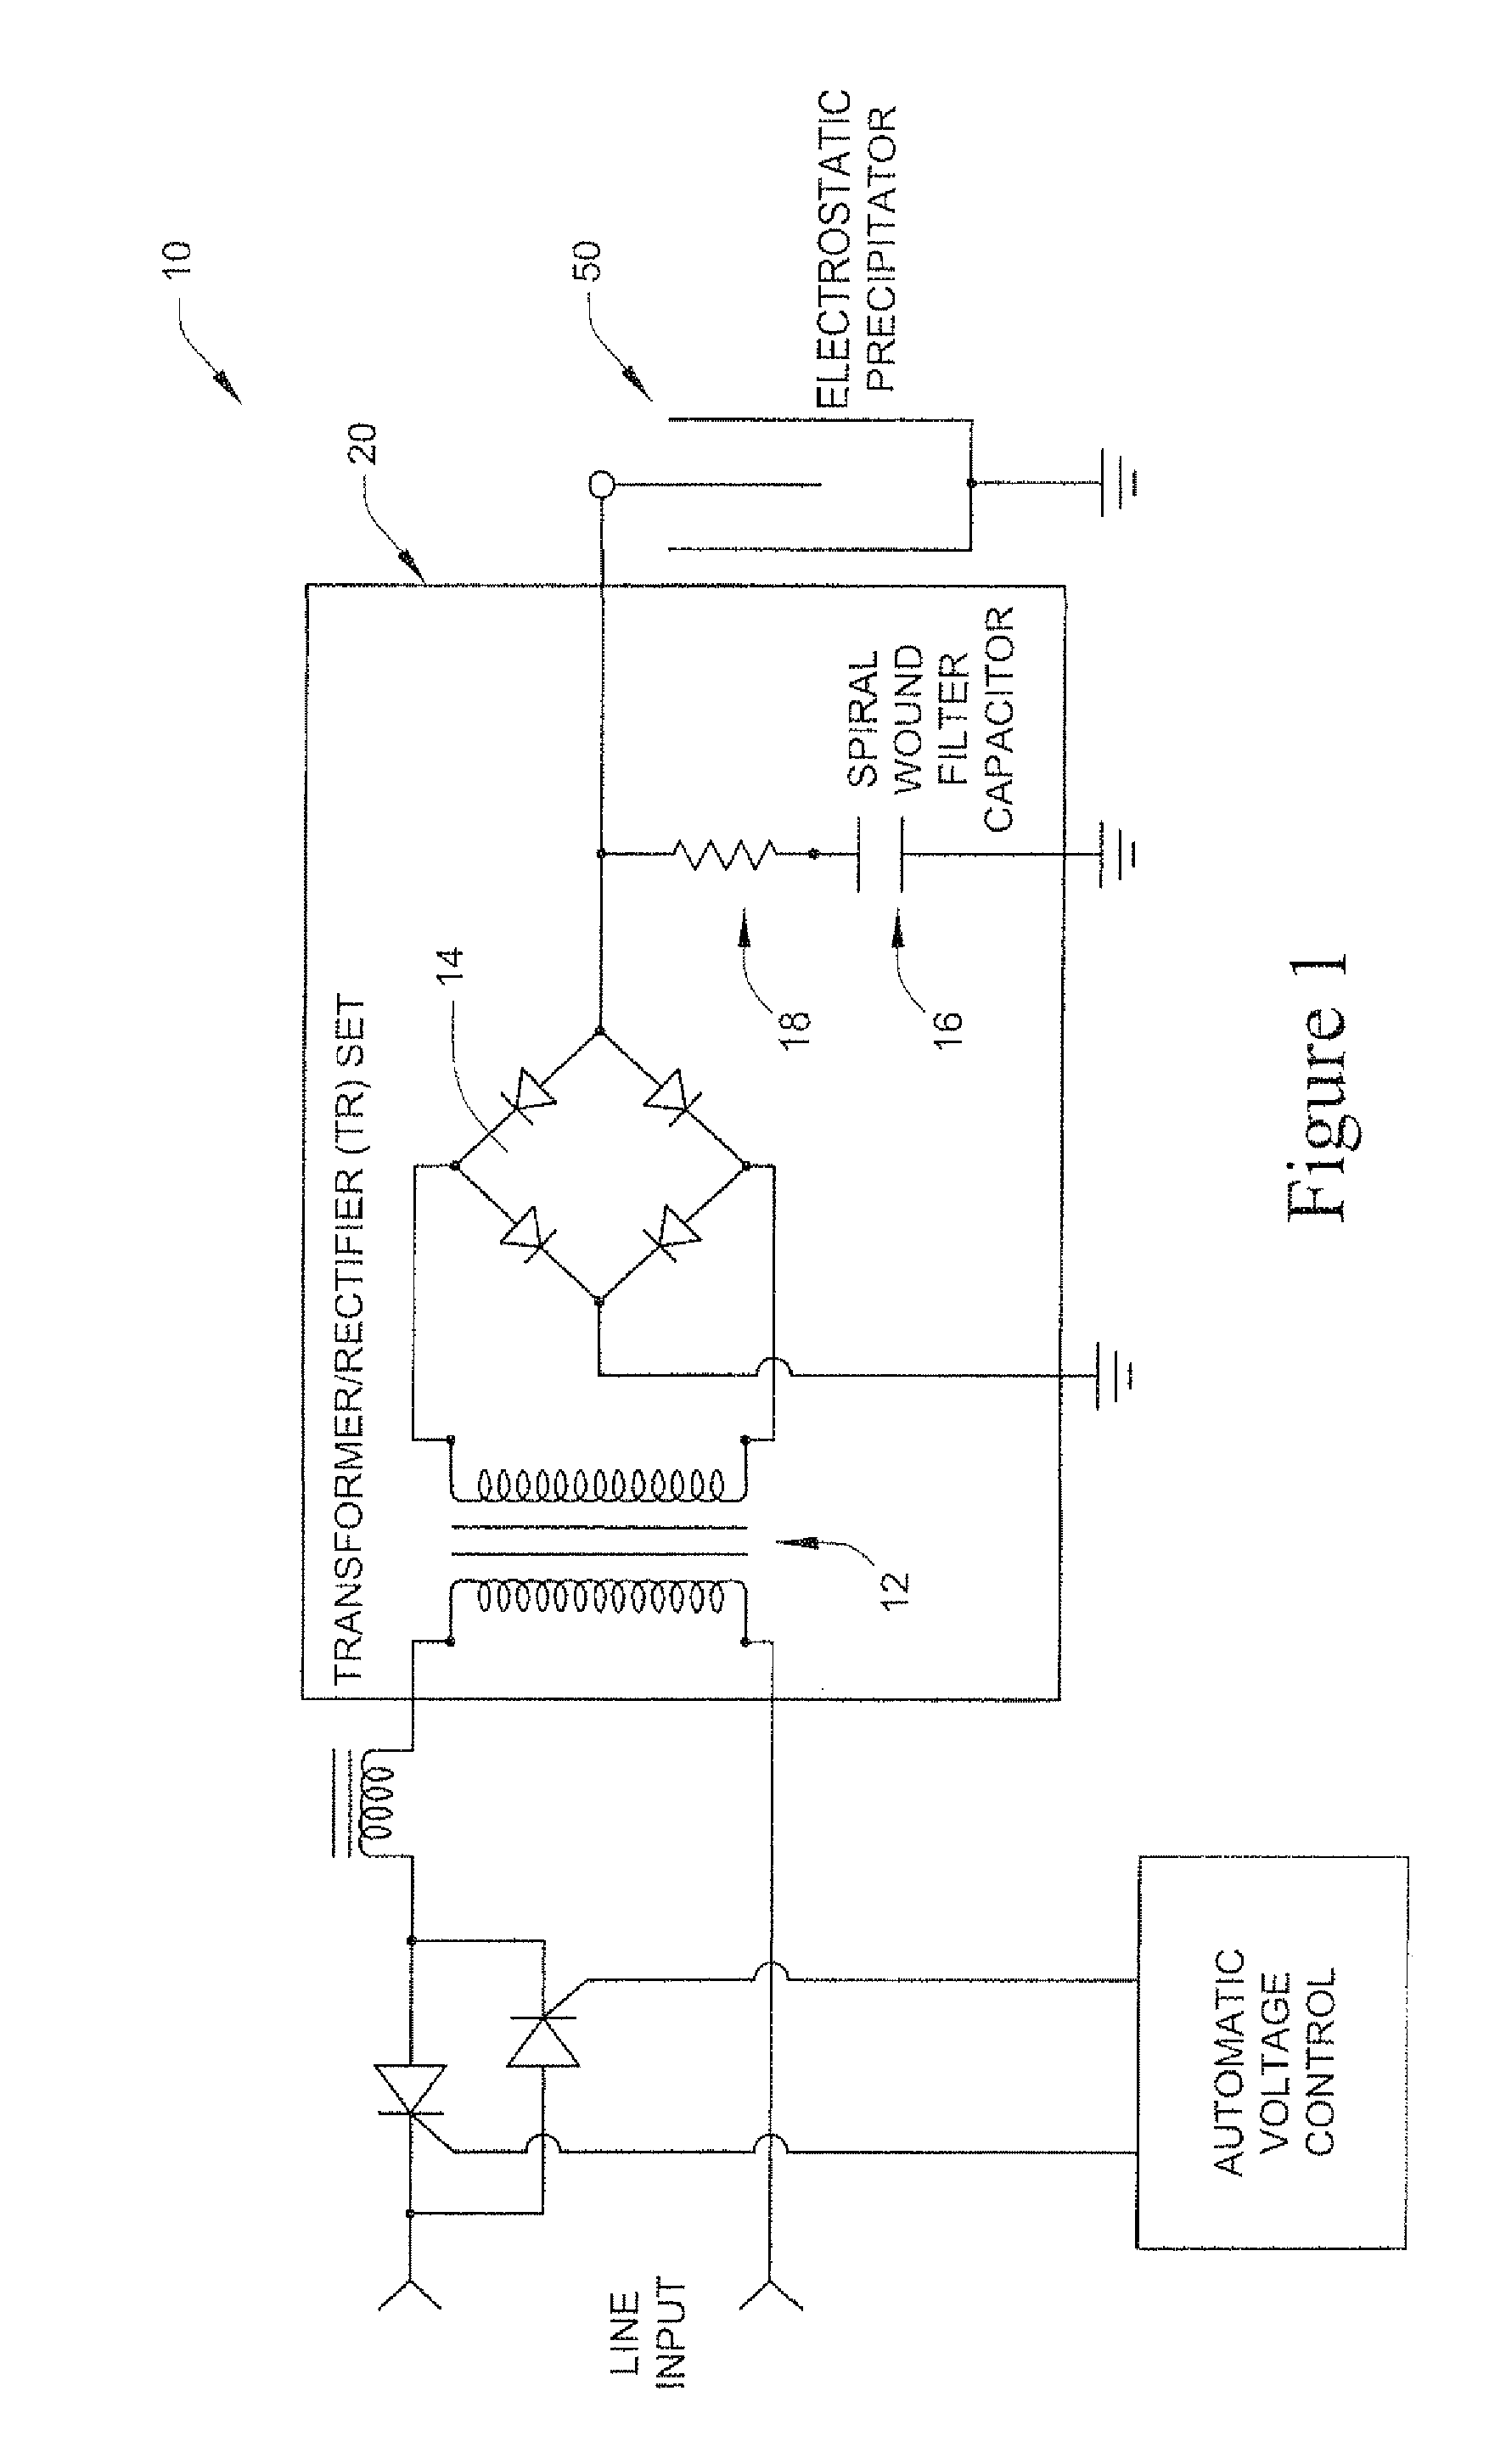 Apparatus and arrangement for housing voltage conditioning and filtering circuitry components for an electrostatic precipitator